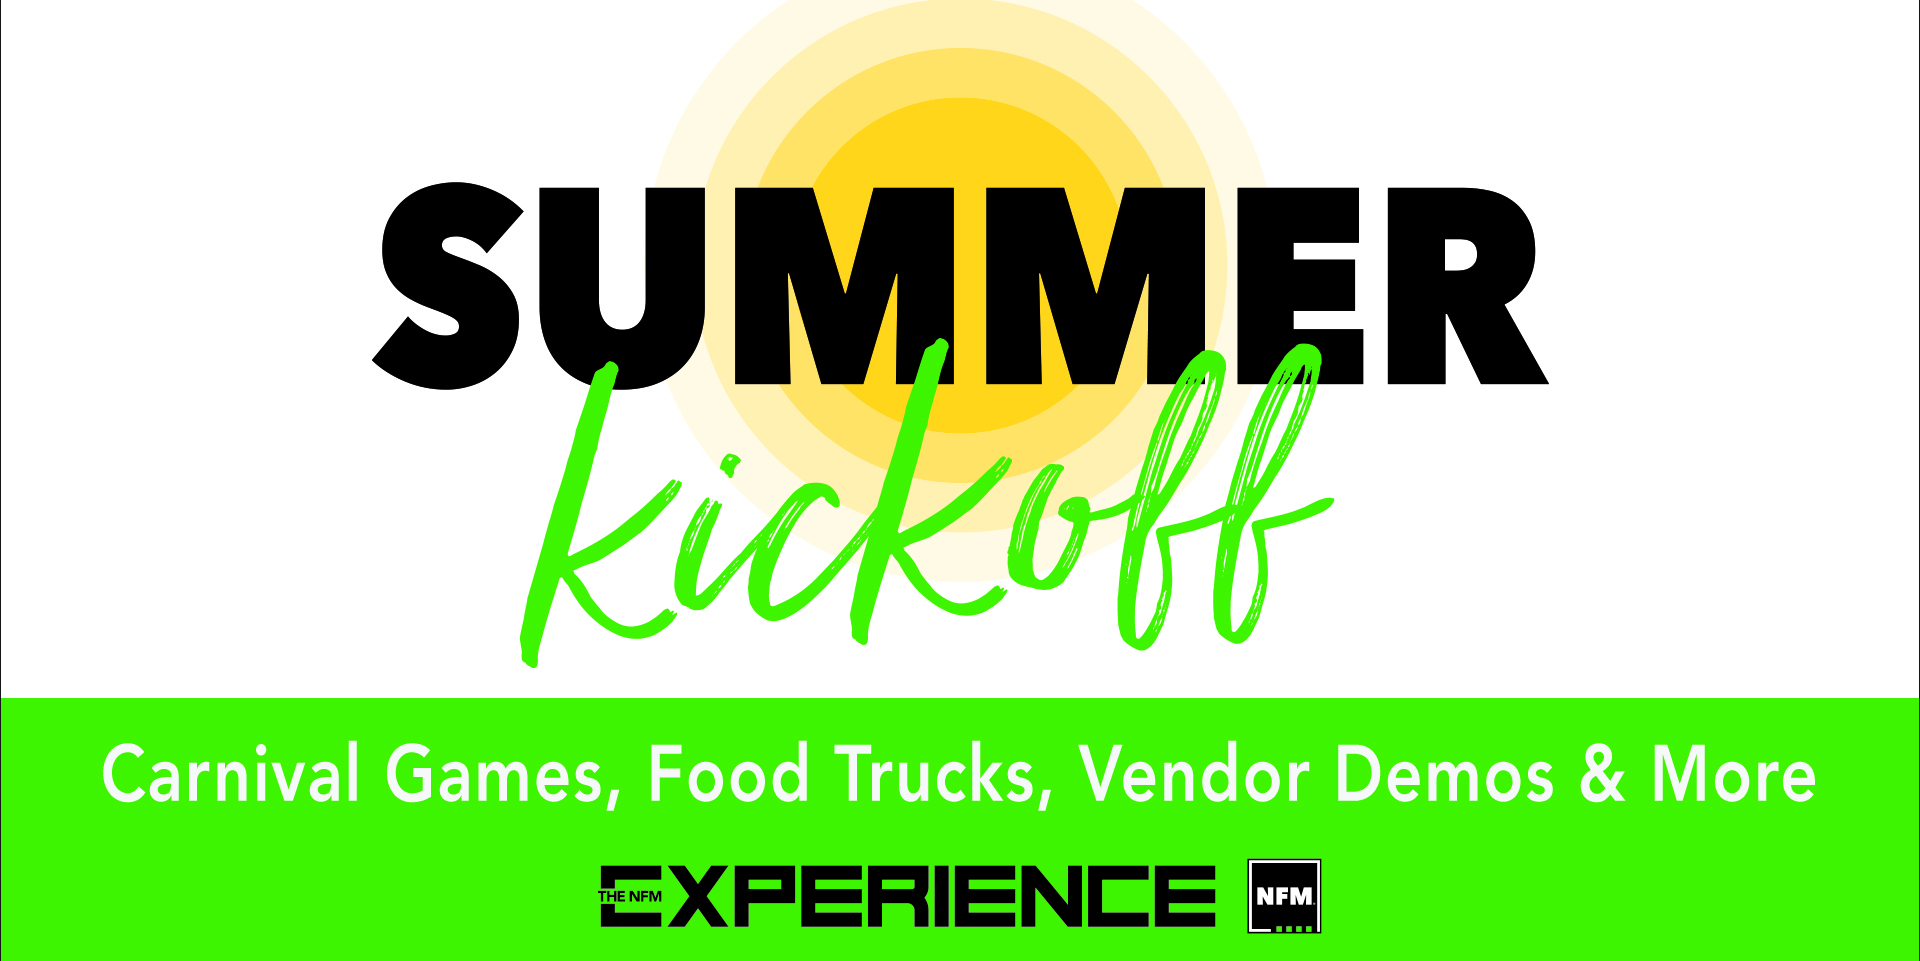 Summer Kickoff Event promotional image